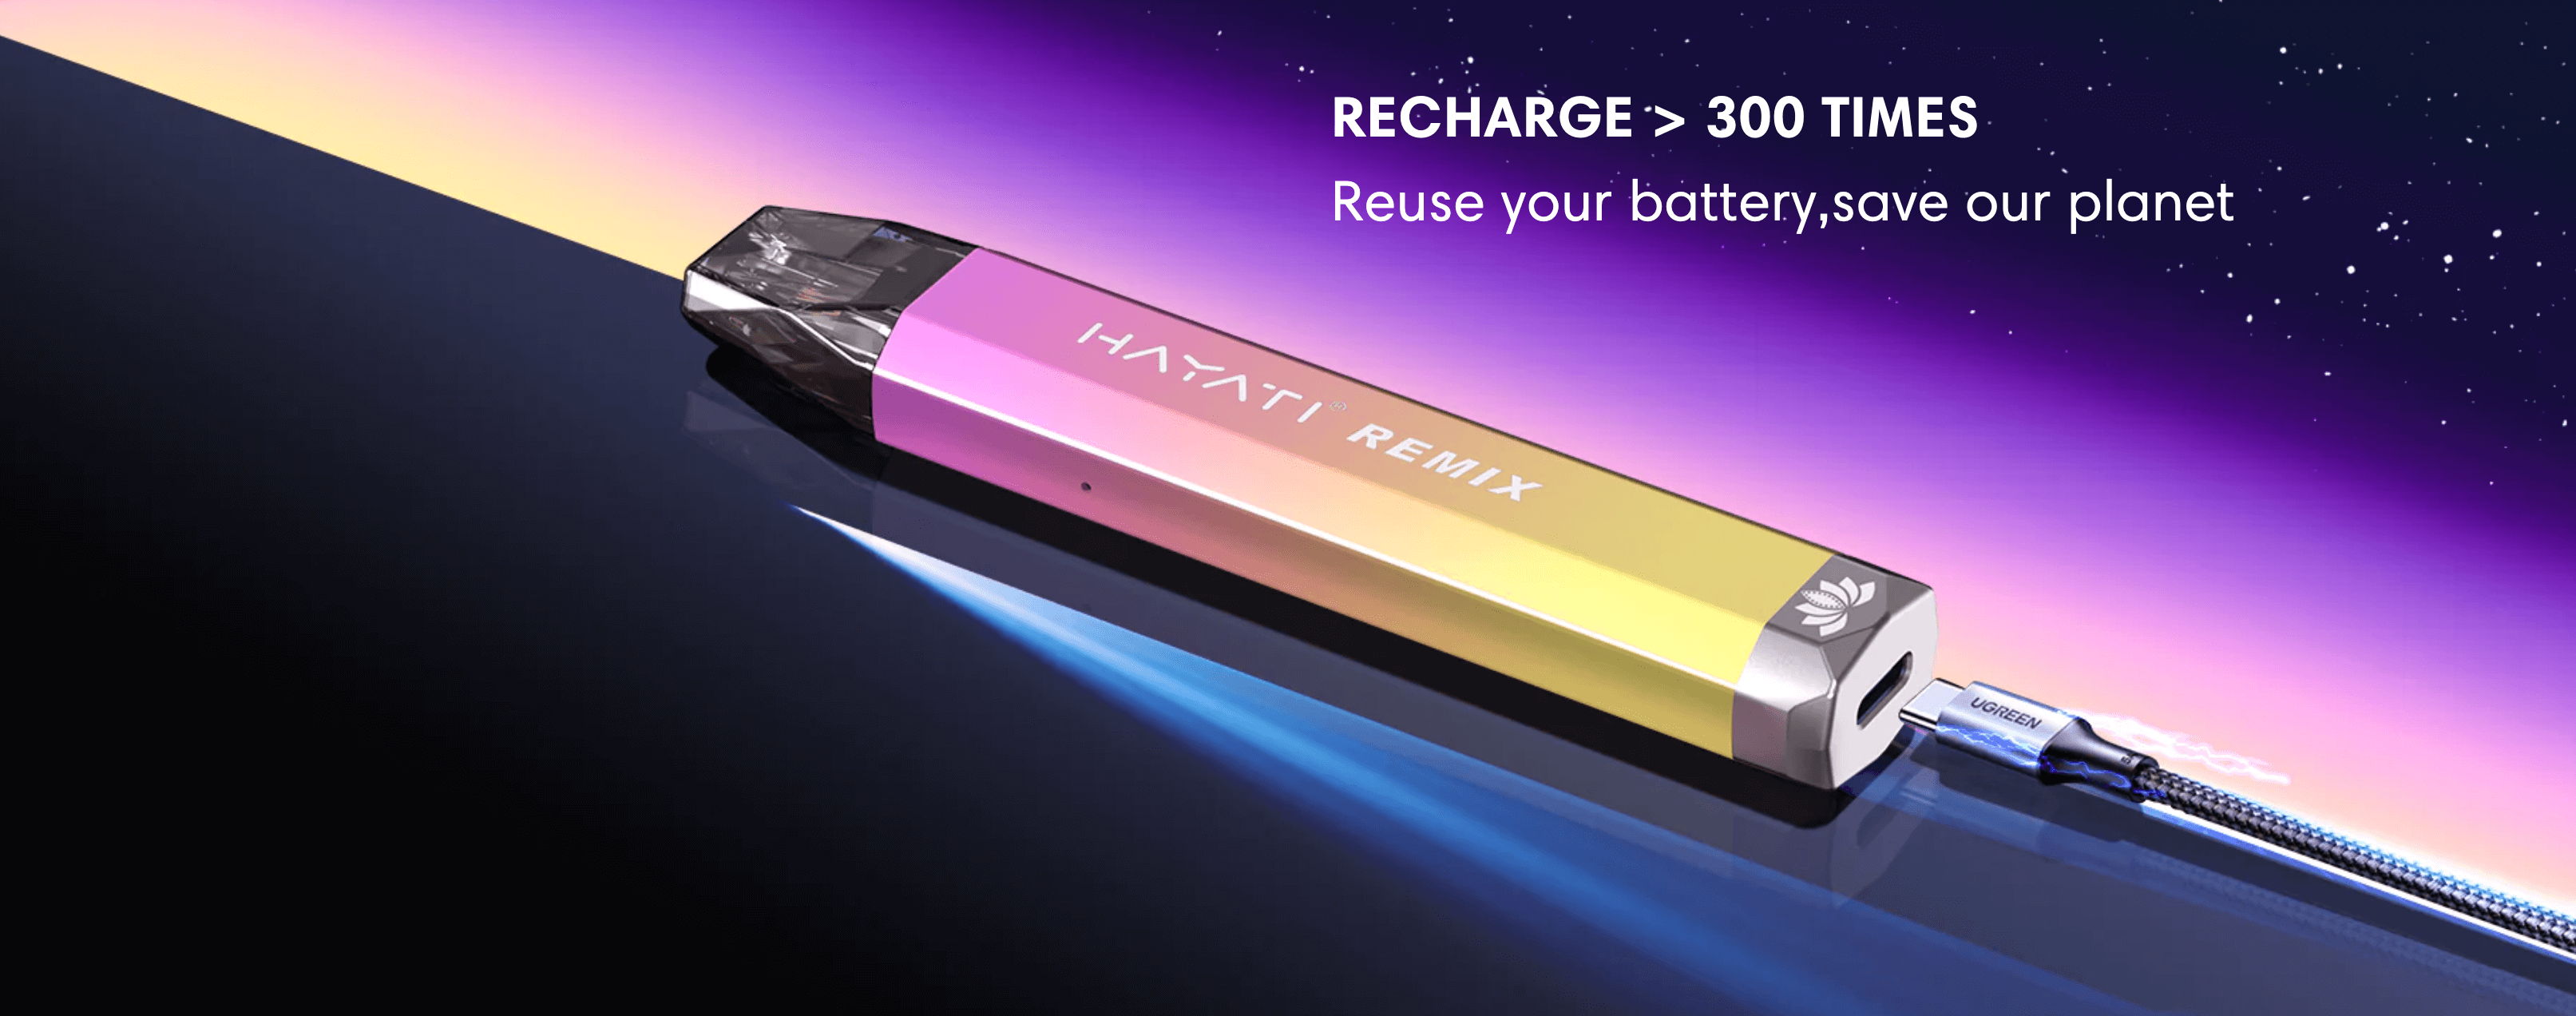 Hayati Remix 2400 - Battery can be recharged up to 300 times